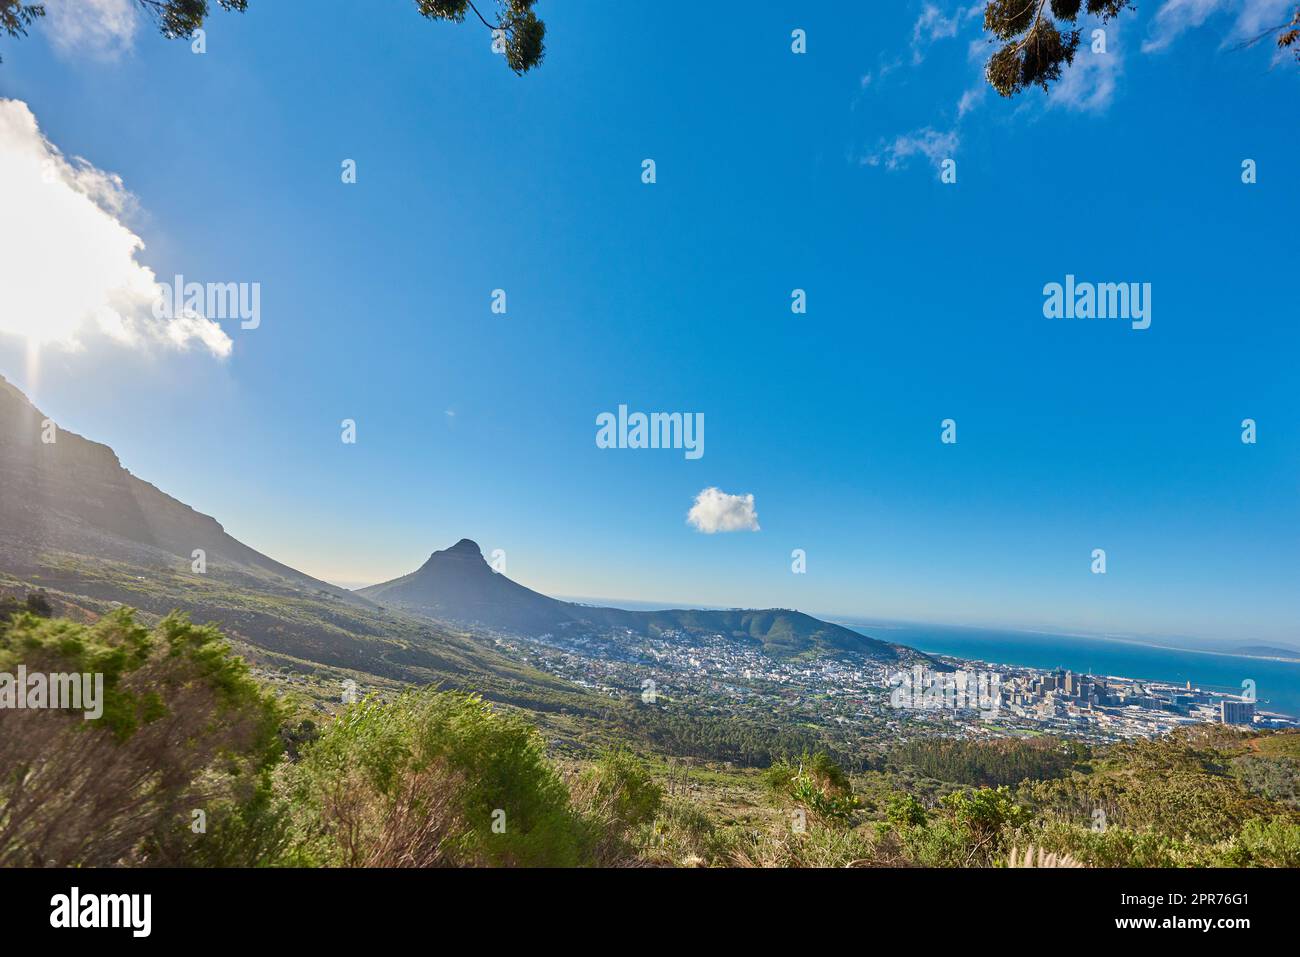 Landscape of a mountain and city in South Africa. Wide angle of shrubs and wild bushes against a bright blue horizon of Cape Town. View of Lions Head, a popular travel destination near Table Mountain Stock Photo